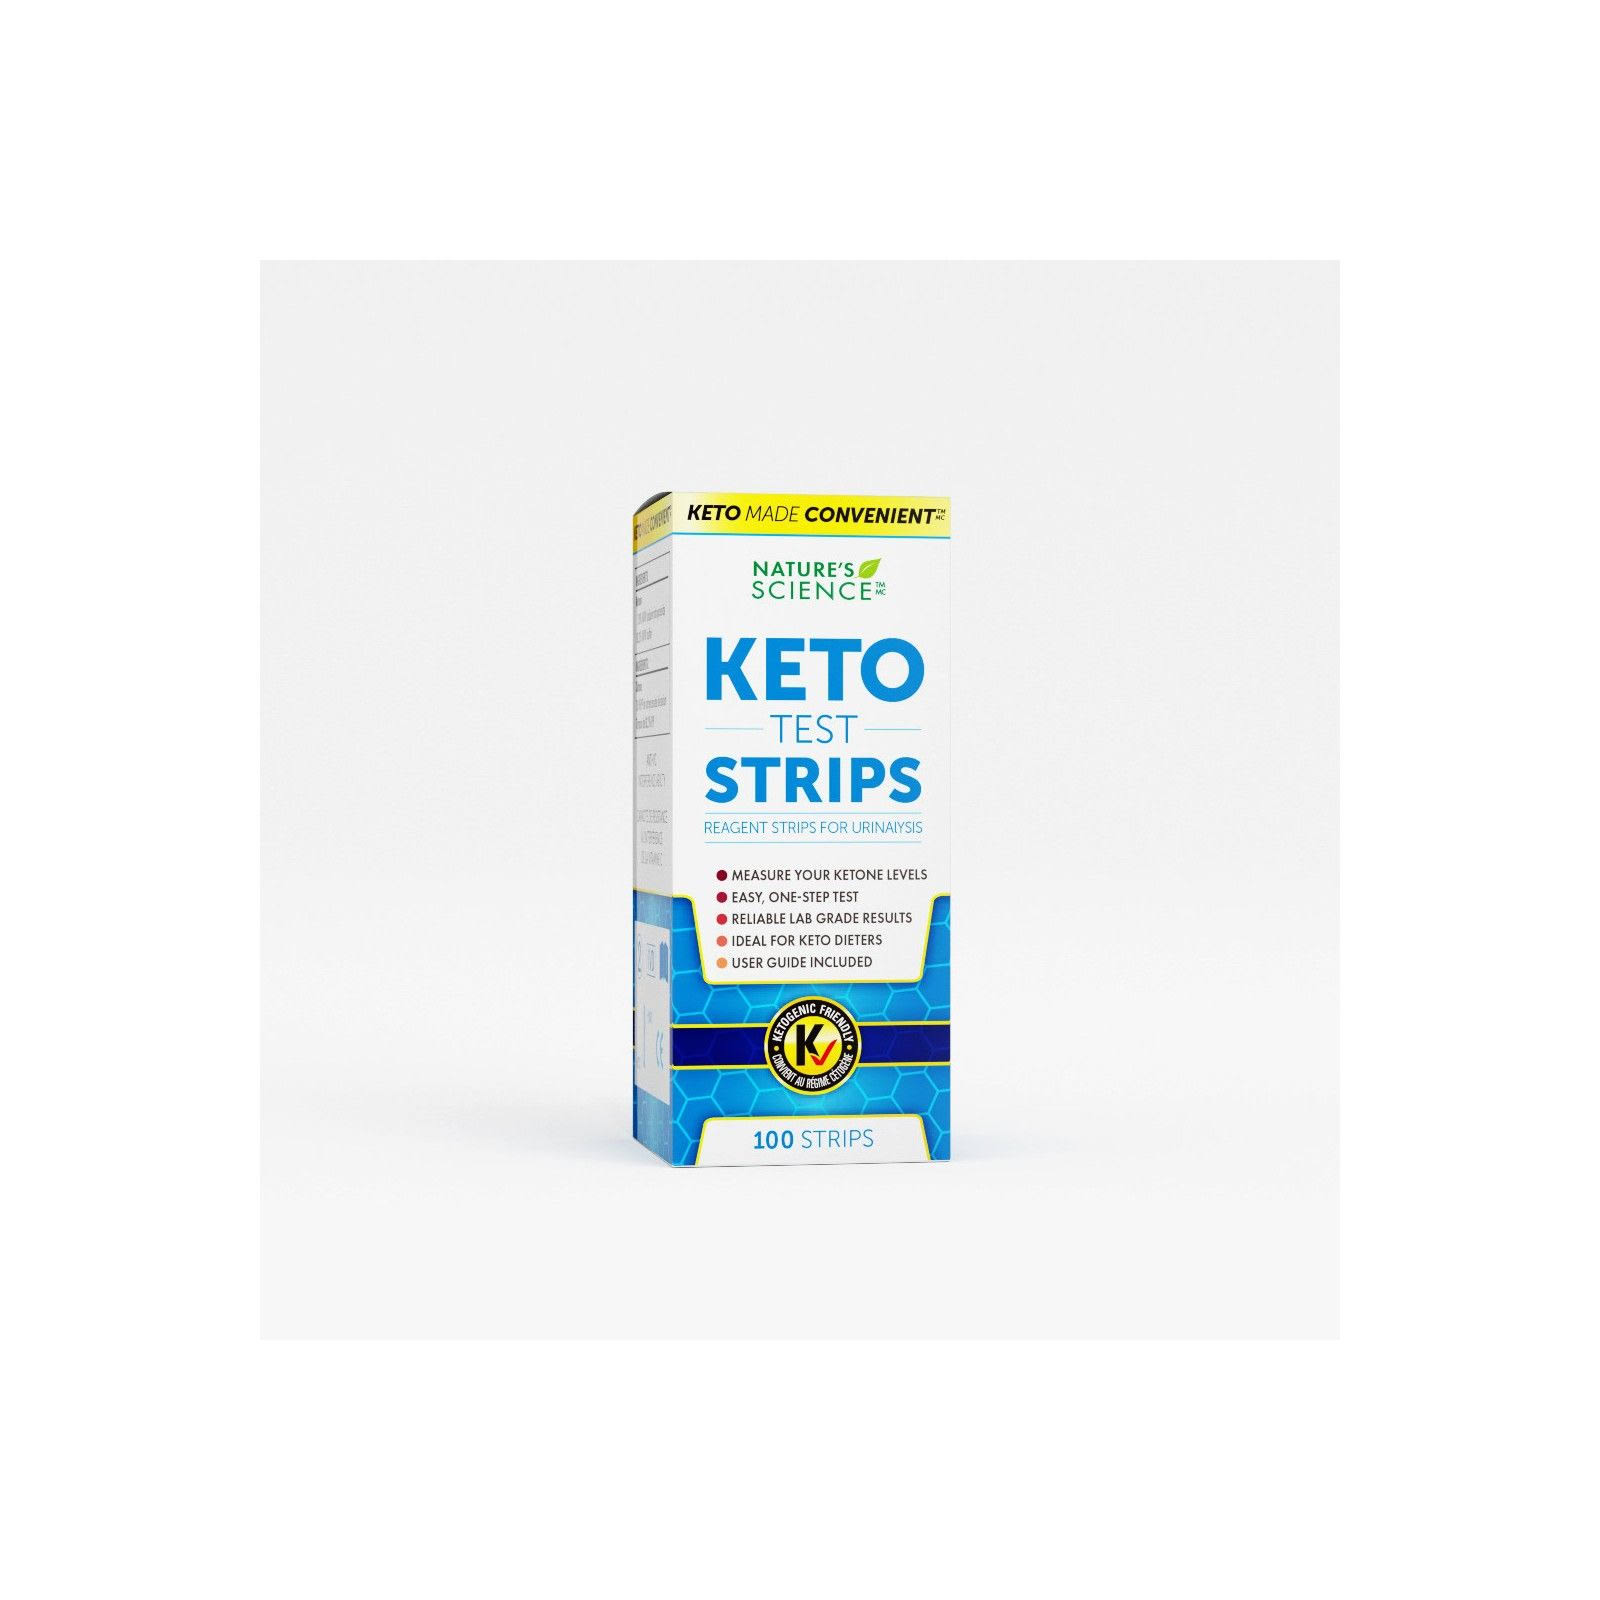 Nature's Science - KETO Test Strips - Packaging of 100ct